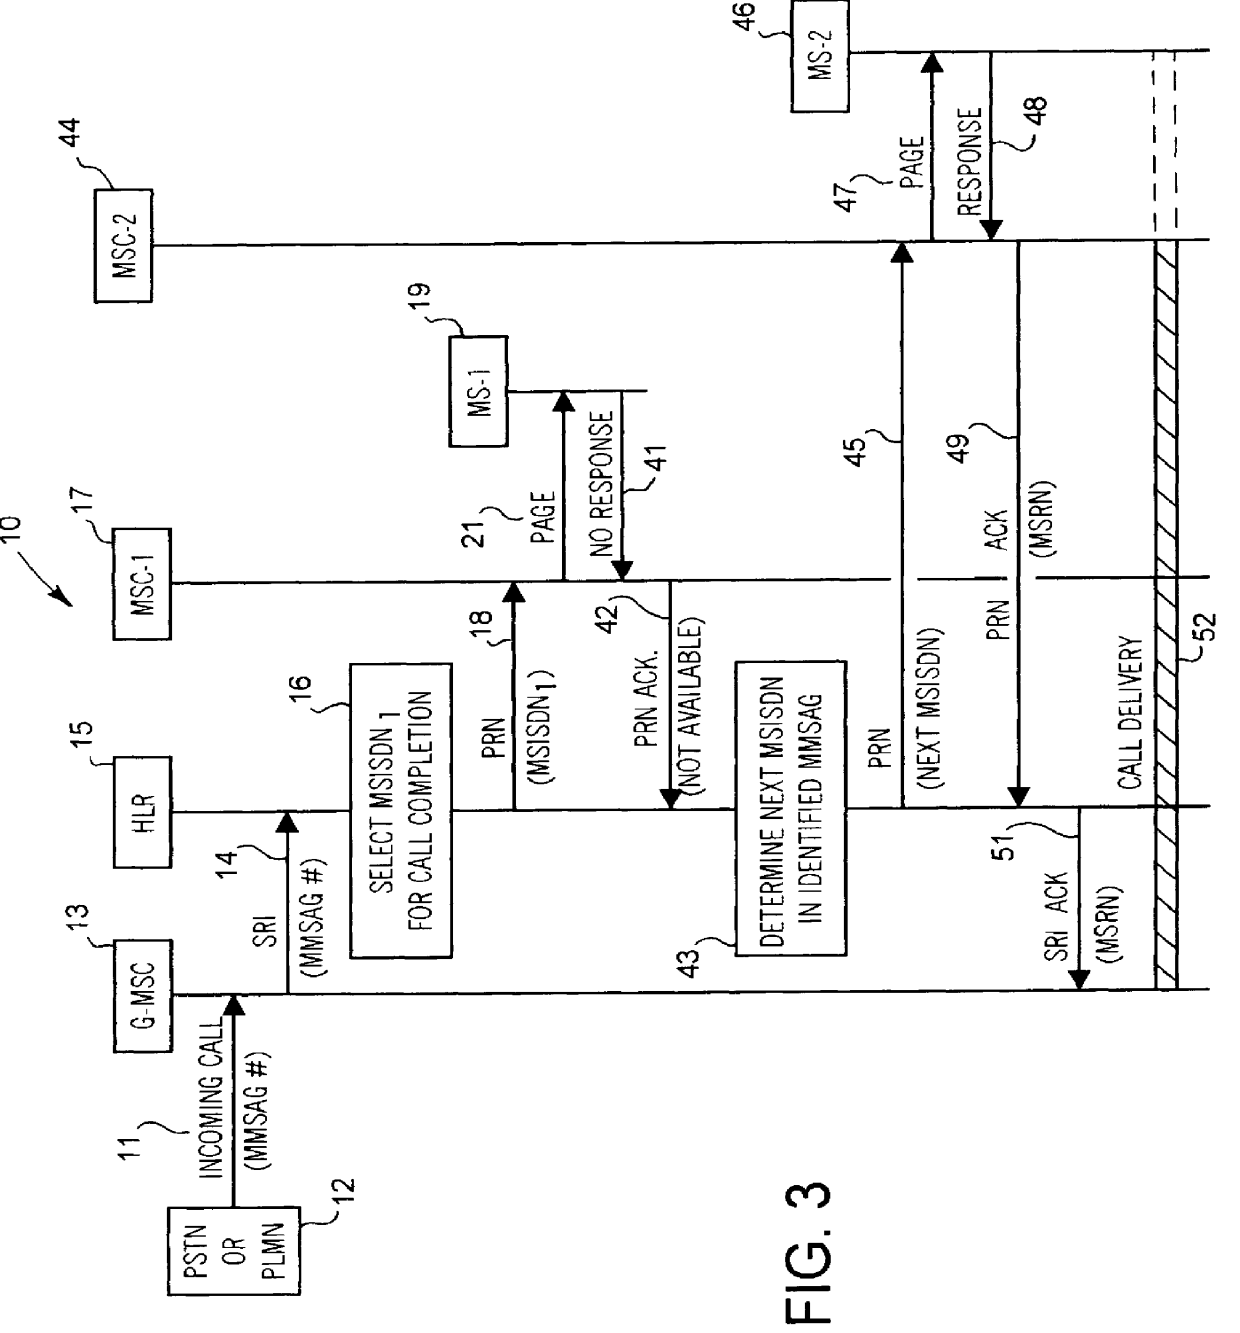 Method of providing a multiple mobile subscriber access group in a radio telecommunications network